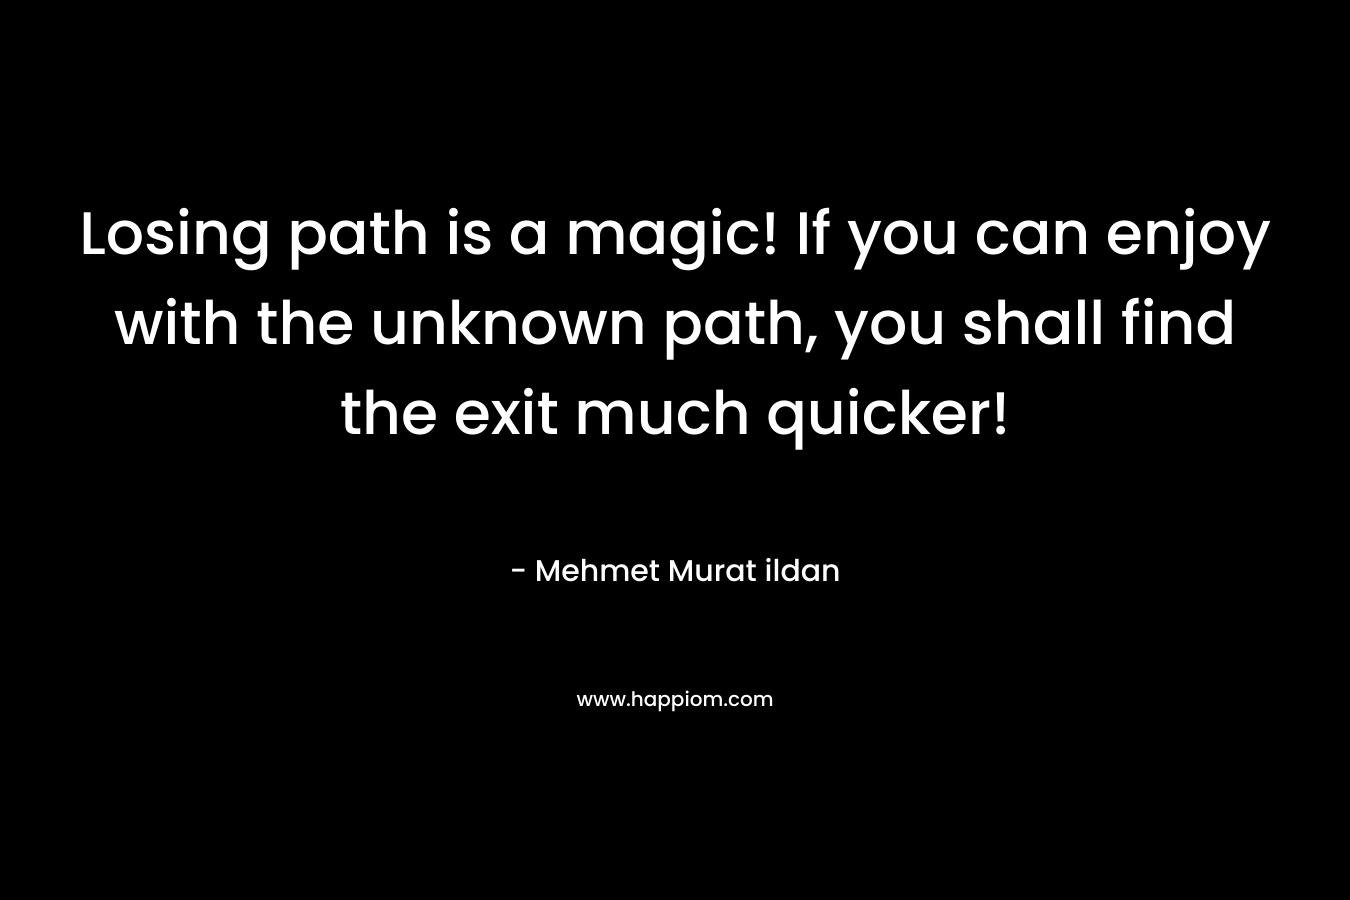 Losing path is a magic! If you can enjoy with the unknown path, you shall find the exit much quicker! – Mehmet Murat ildan